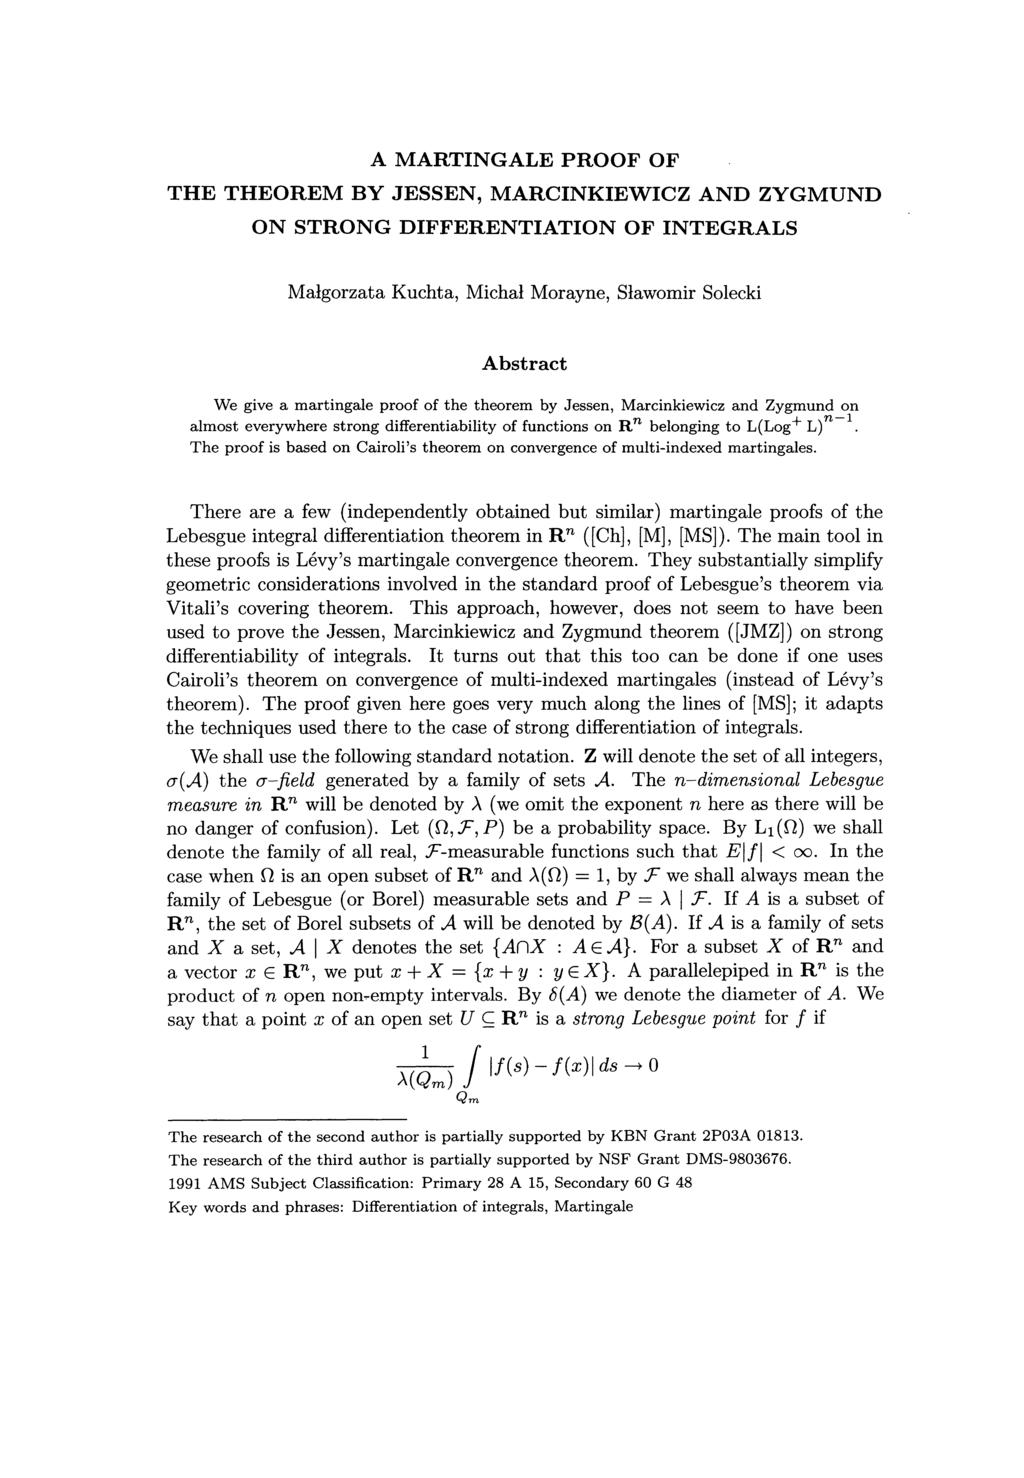 A MARTINGALE PROOF OF THE THEOREM BY JESSEN, MARCINKIEWICZ AND ZYGMUND ON STRONG DIFFERENTIATION OF INTEGRALS Malgorzata Kuchta, Michal Morayne, Slawomir Solecki Abstract We give a martingale proof